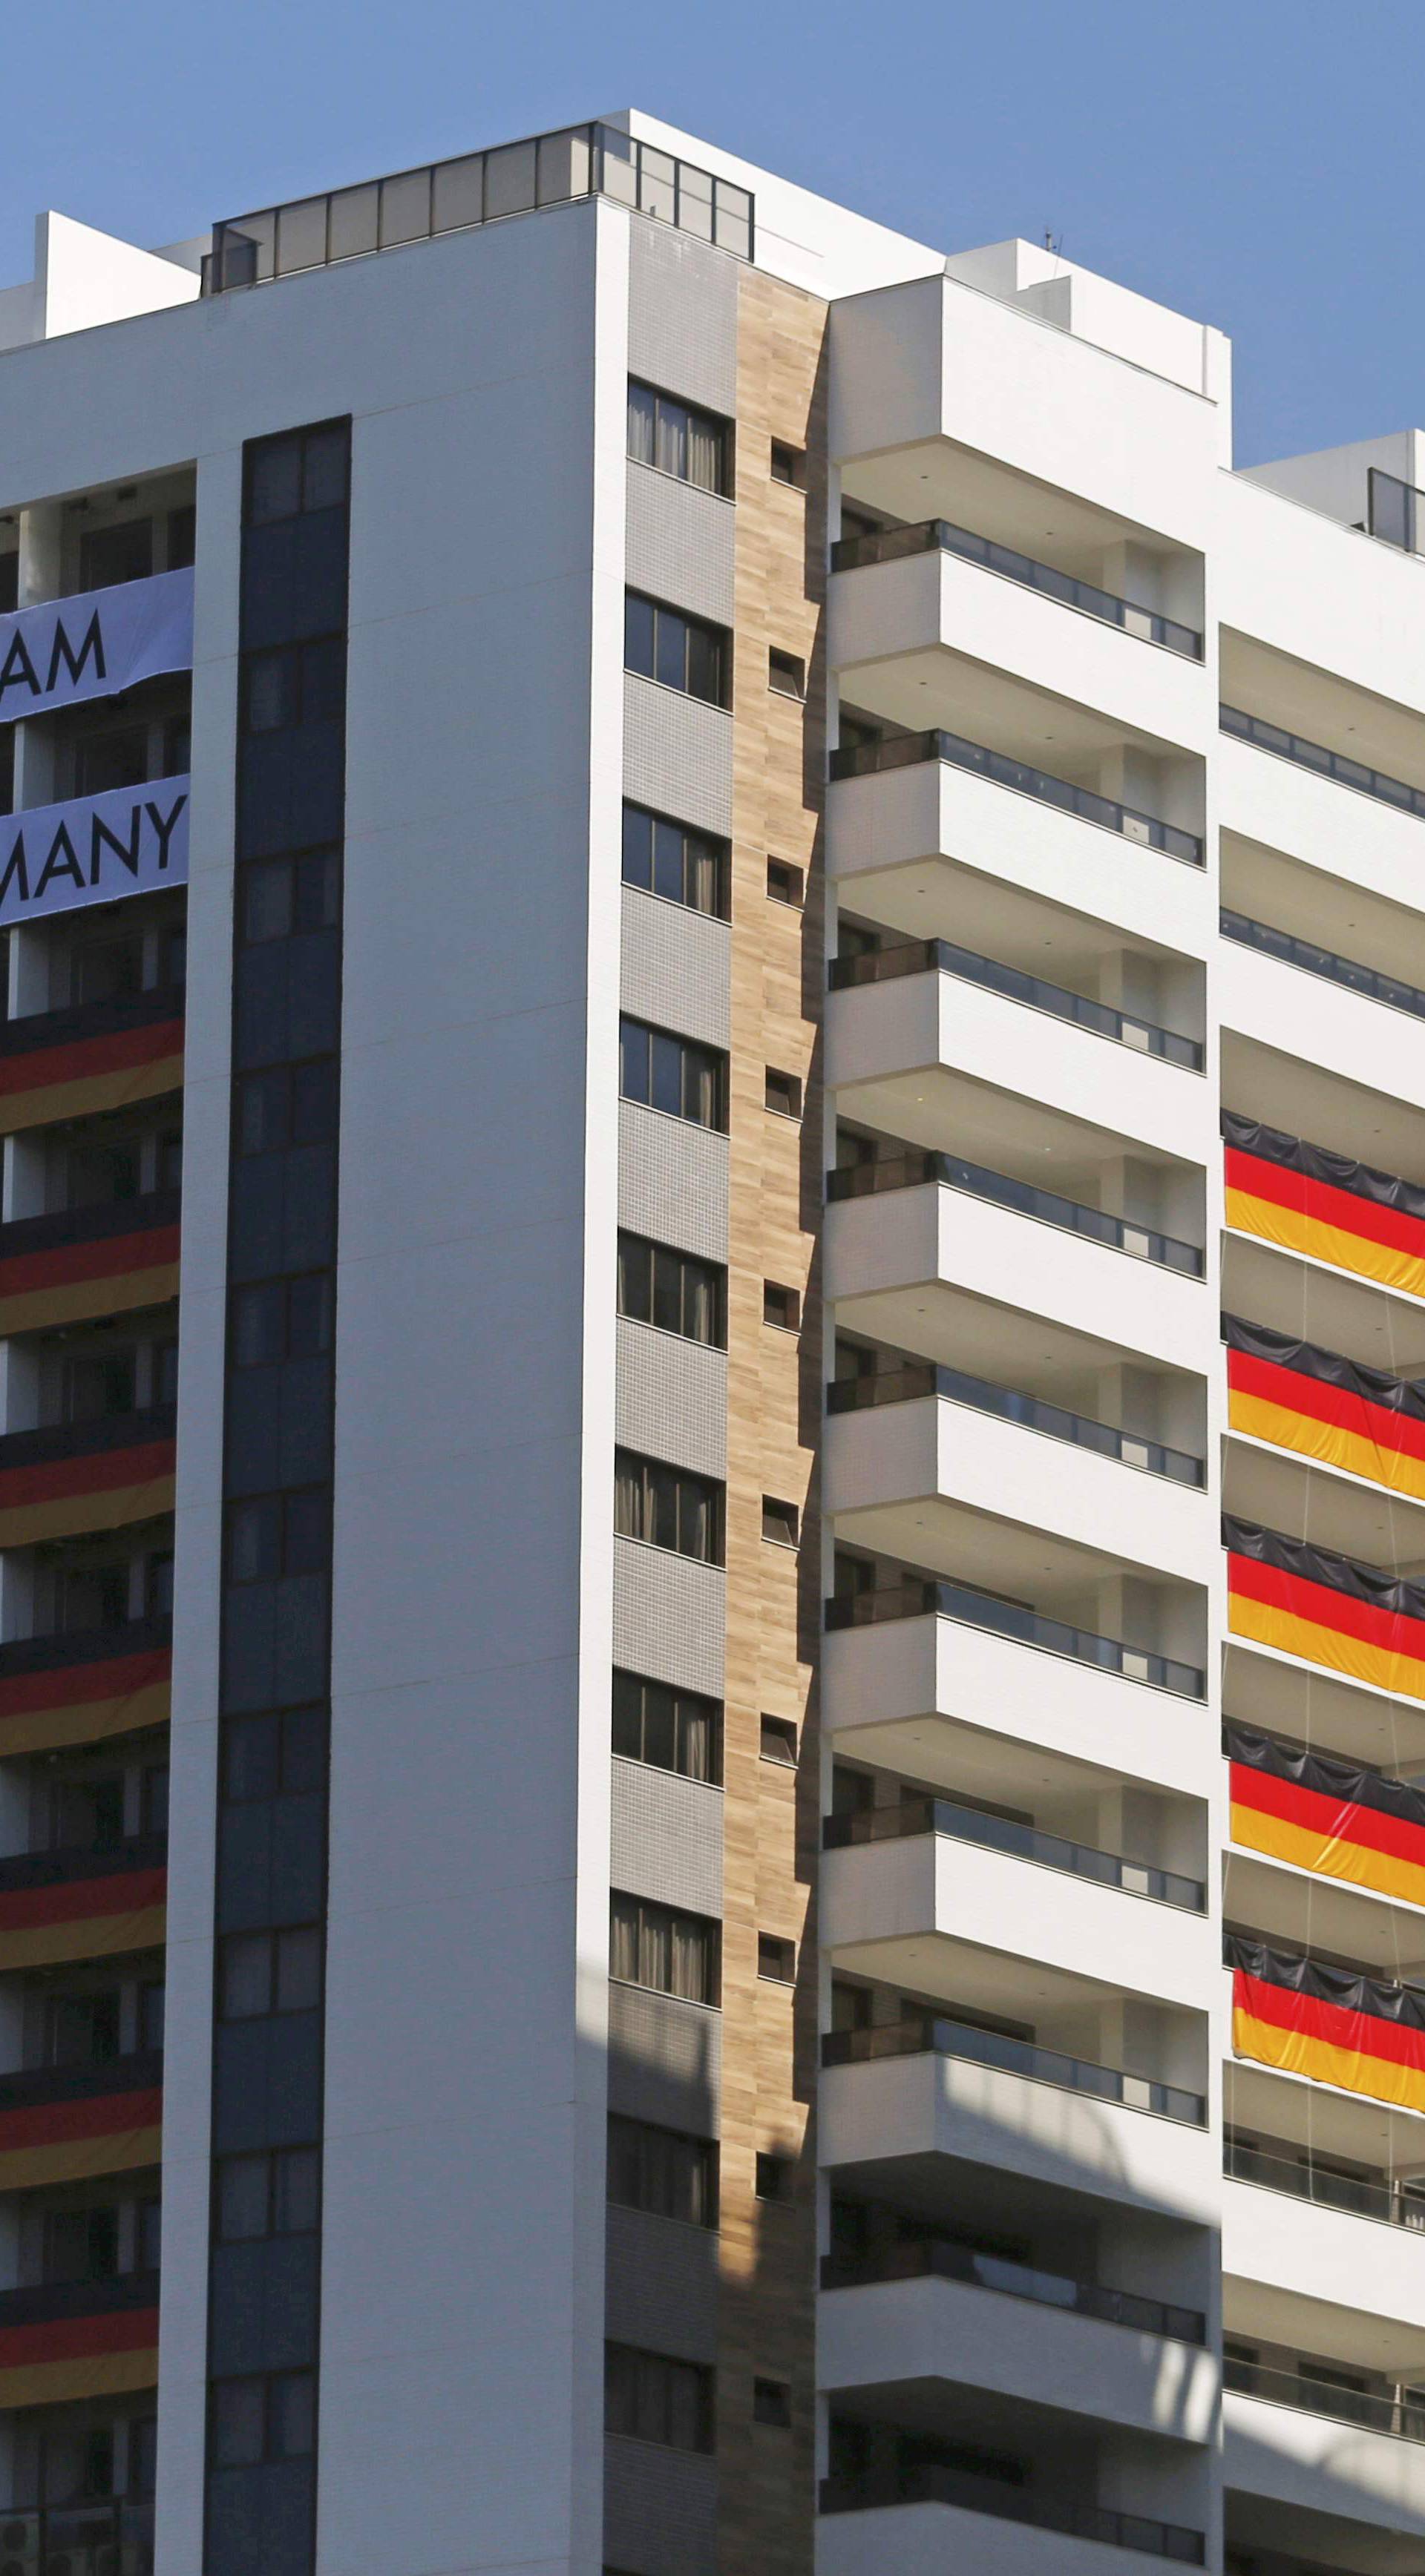 A view of one of the blocks of apartments where Germany's athletes are supposed to stay in Rio de Janeiro